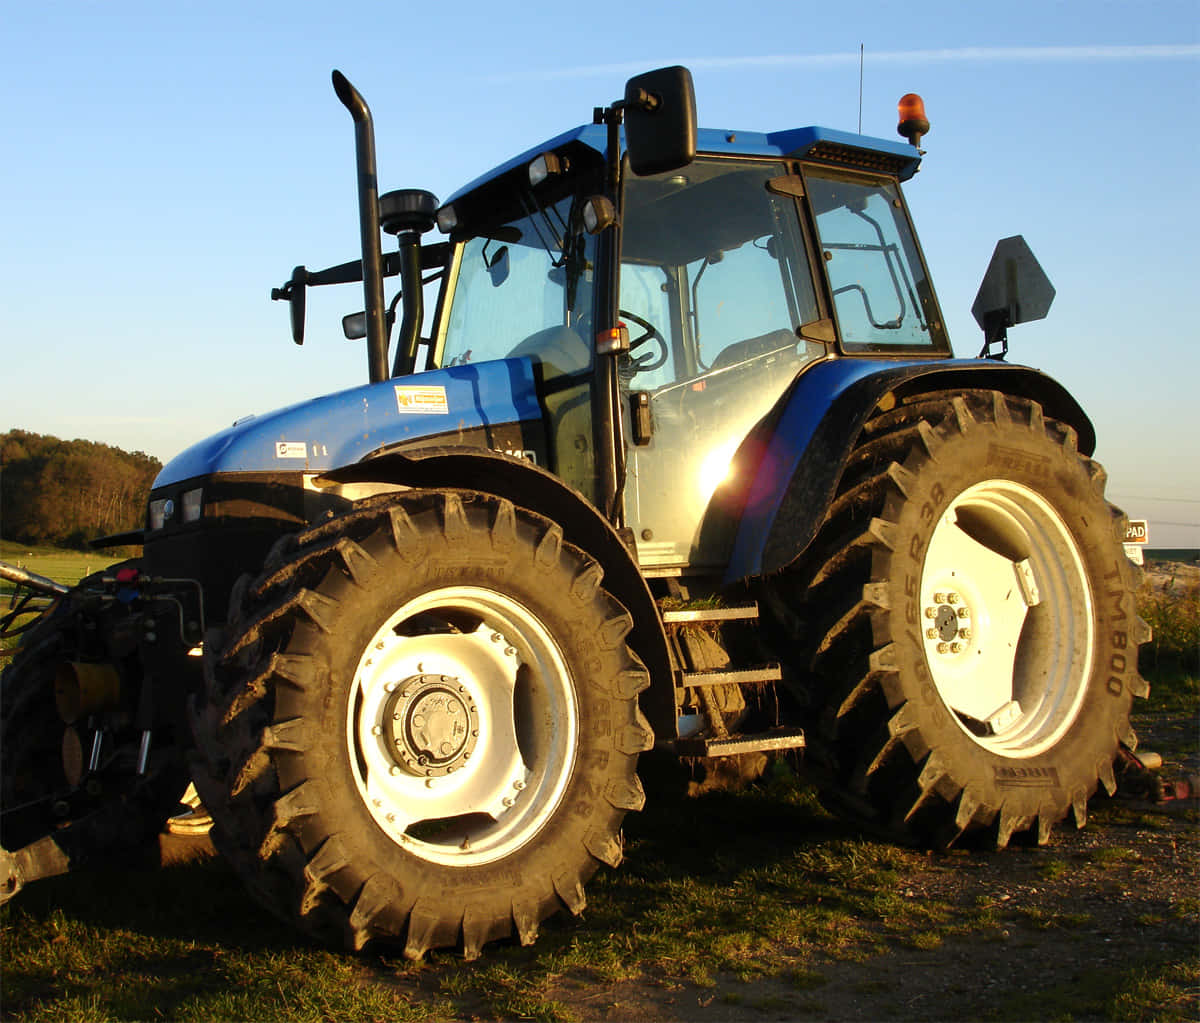 A Powerful Agricultural Machine in the Field